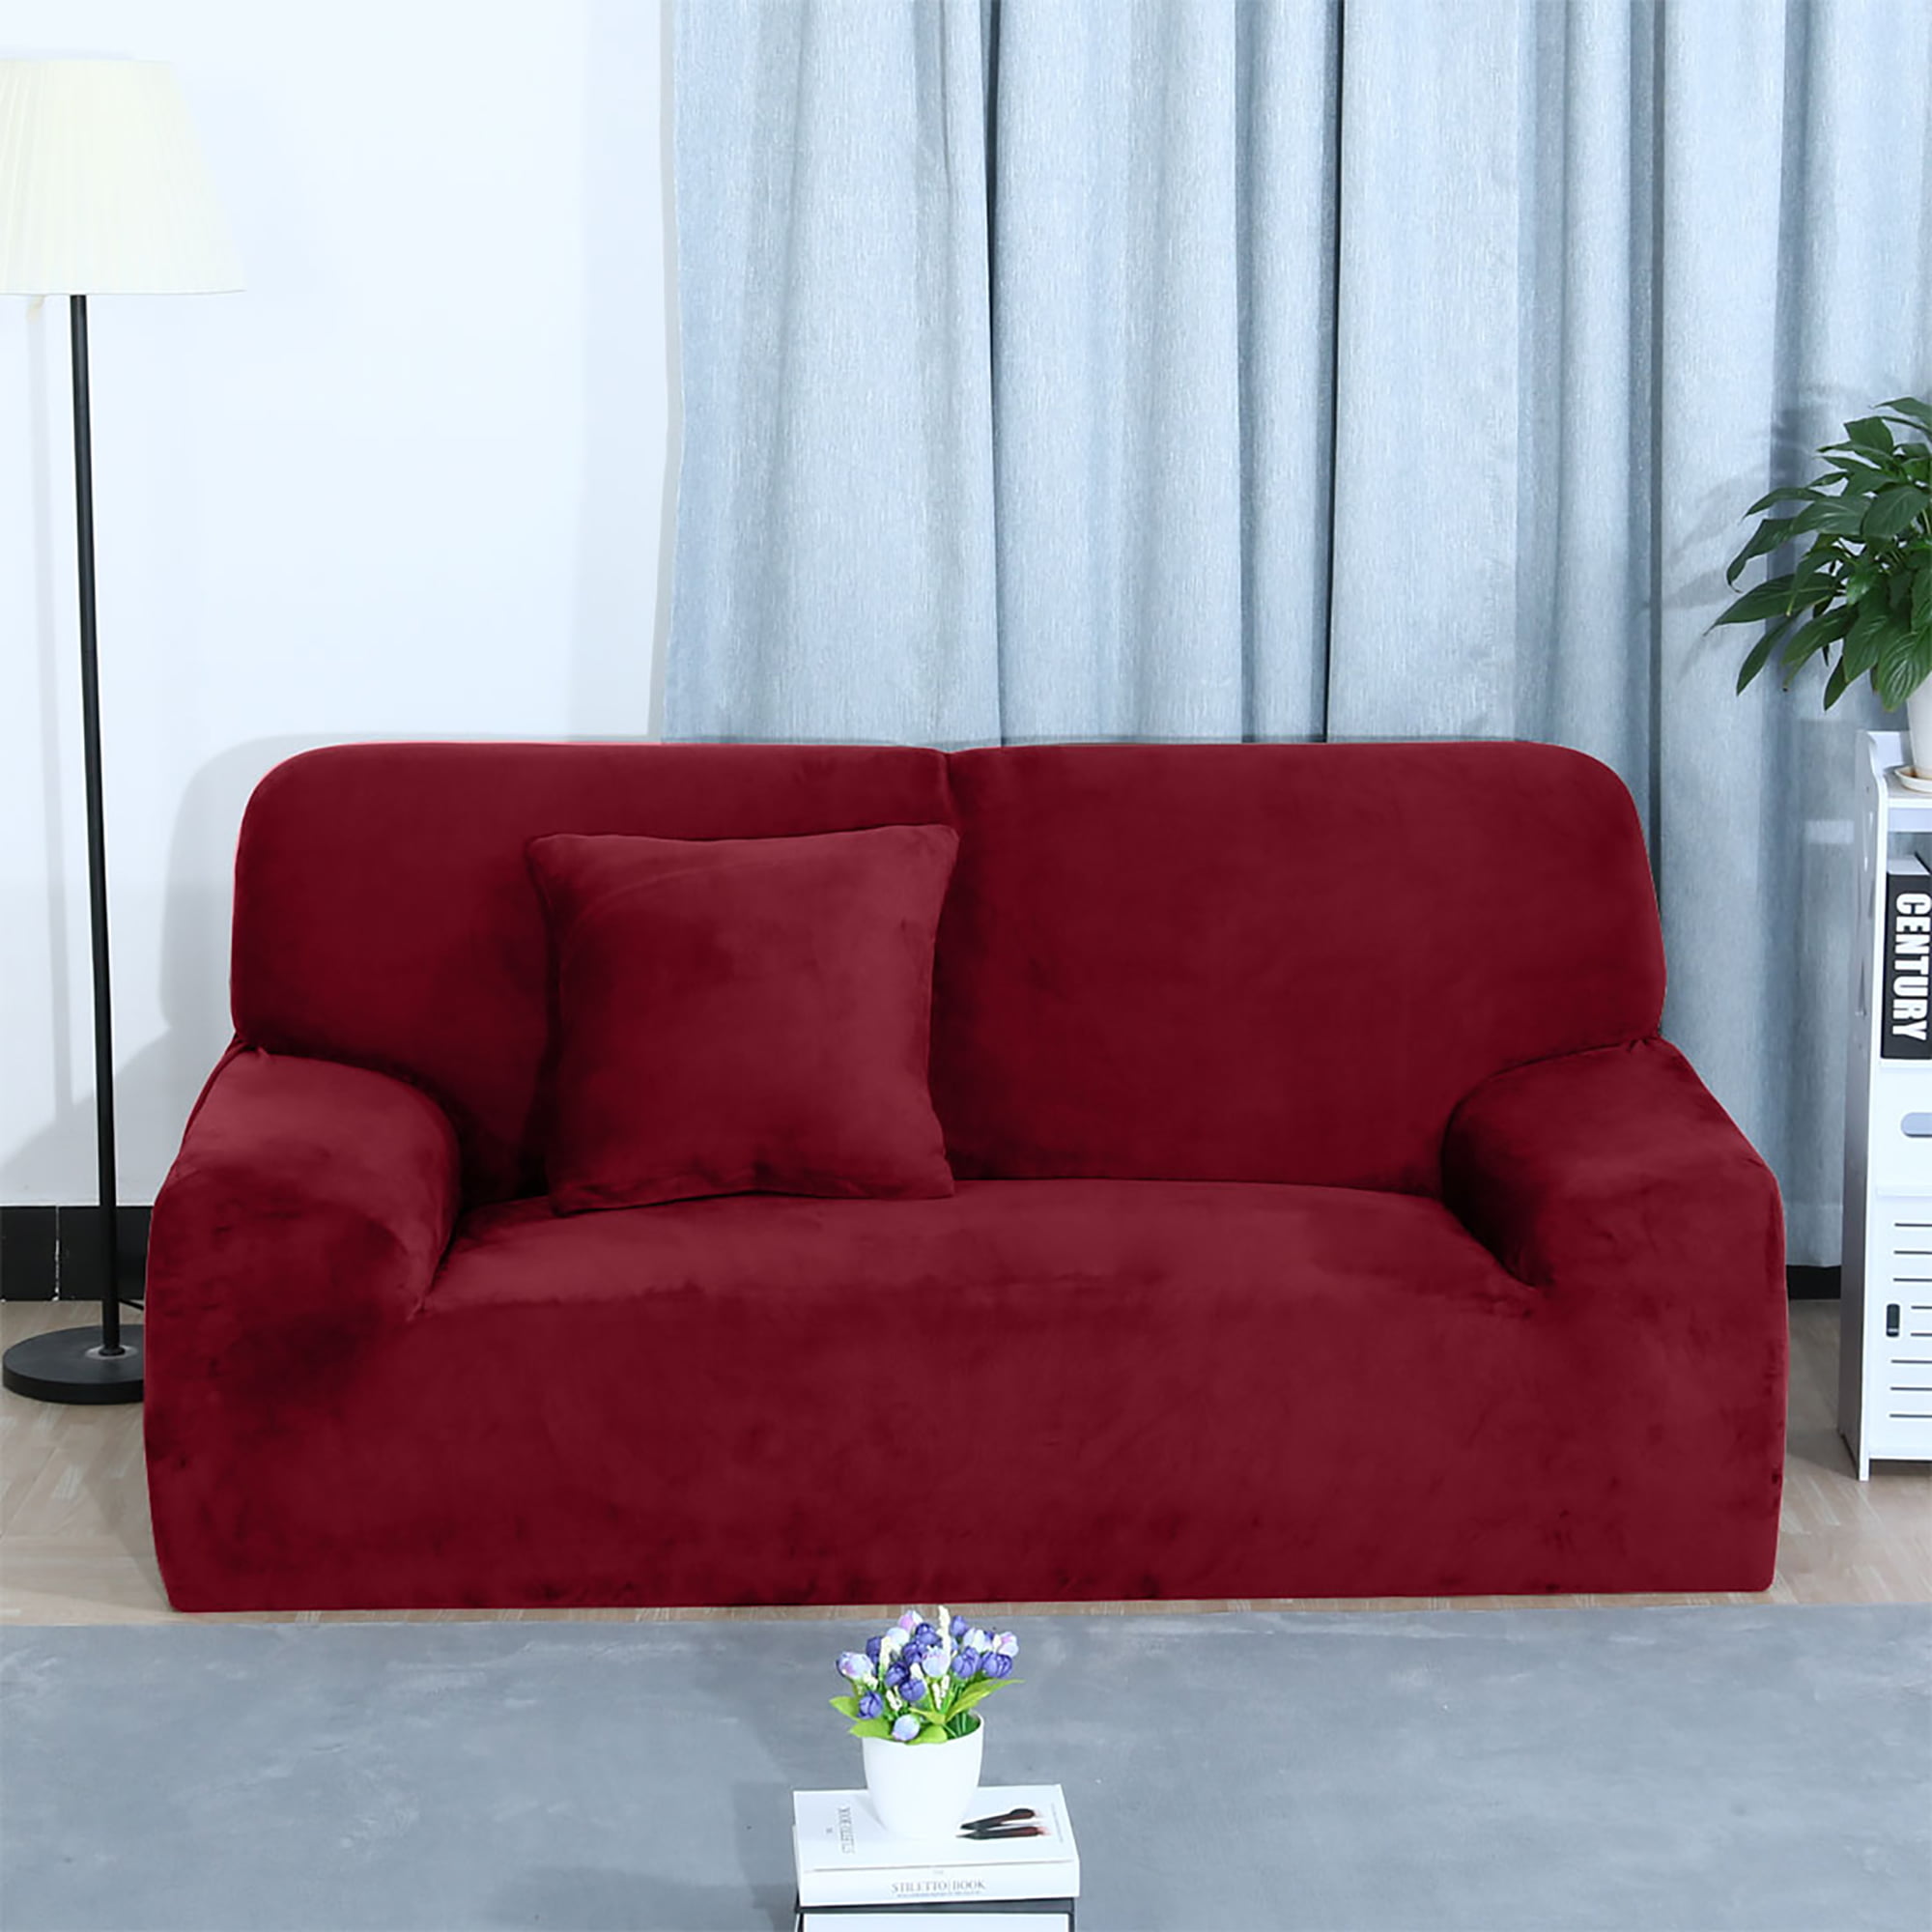 Details about   3 Seater Stretch Spandex Chair Sofa Couch Cover Elastic Slipcover Protector 